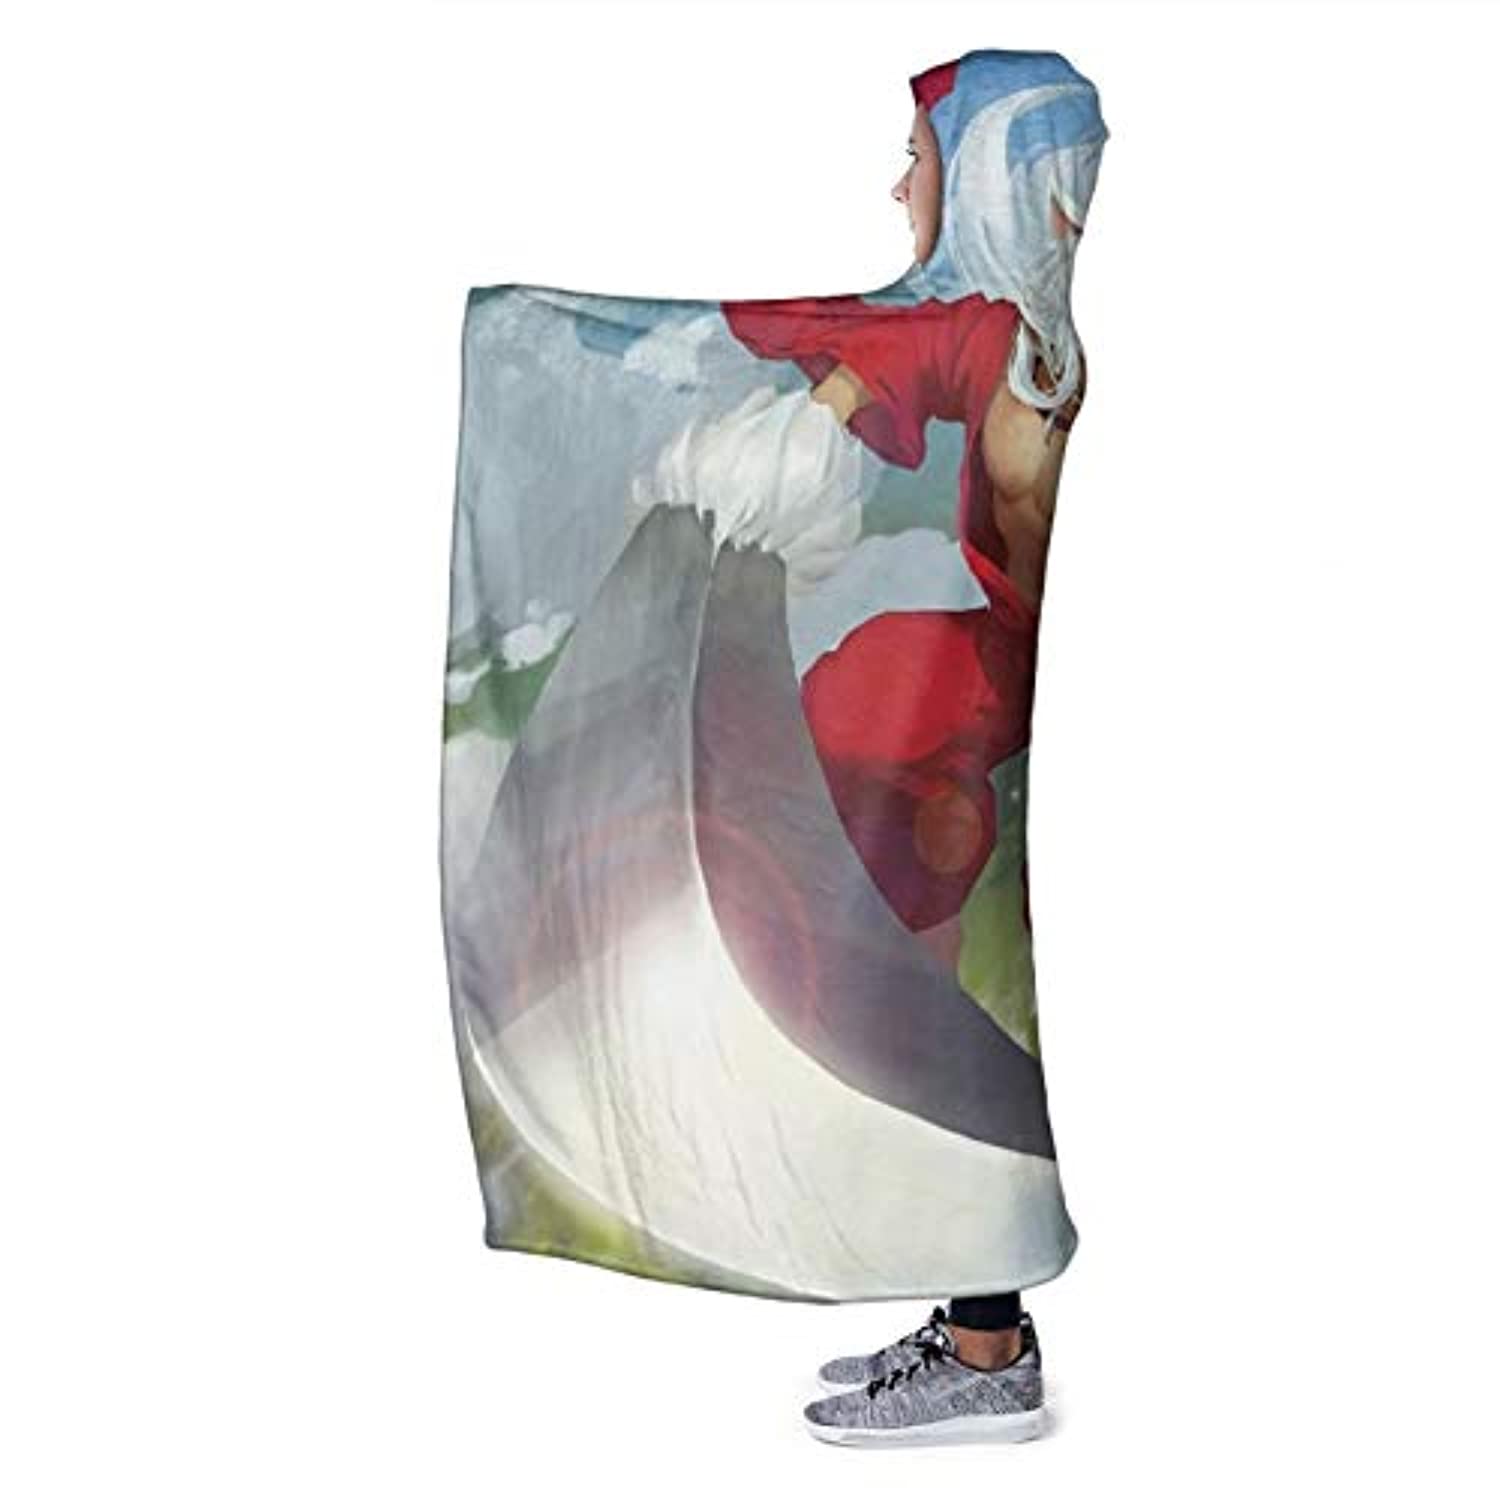 Details about   3D Inuyasha Flowers T192 Hooded Blanket Cloak Japan Anime Cosplay Game Wendy 